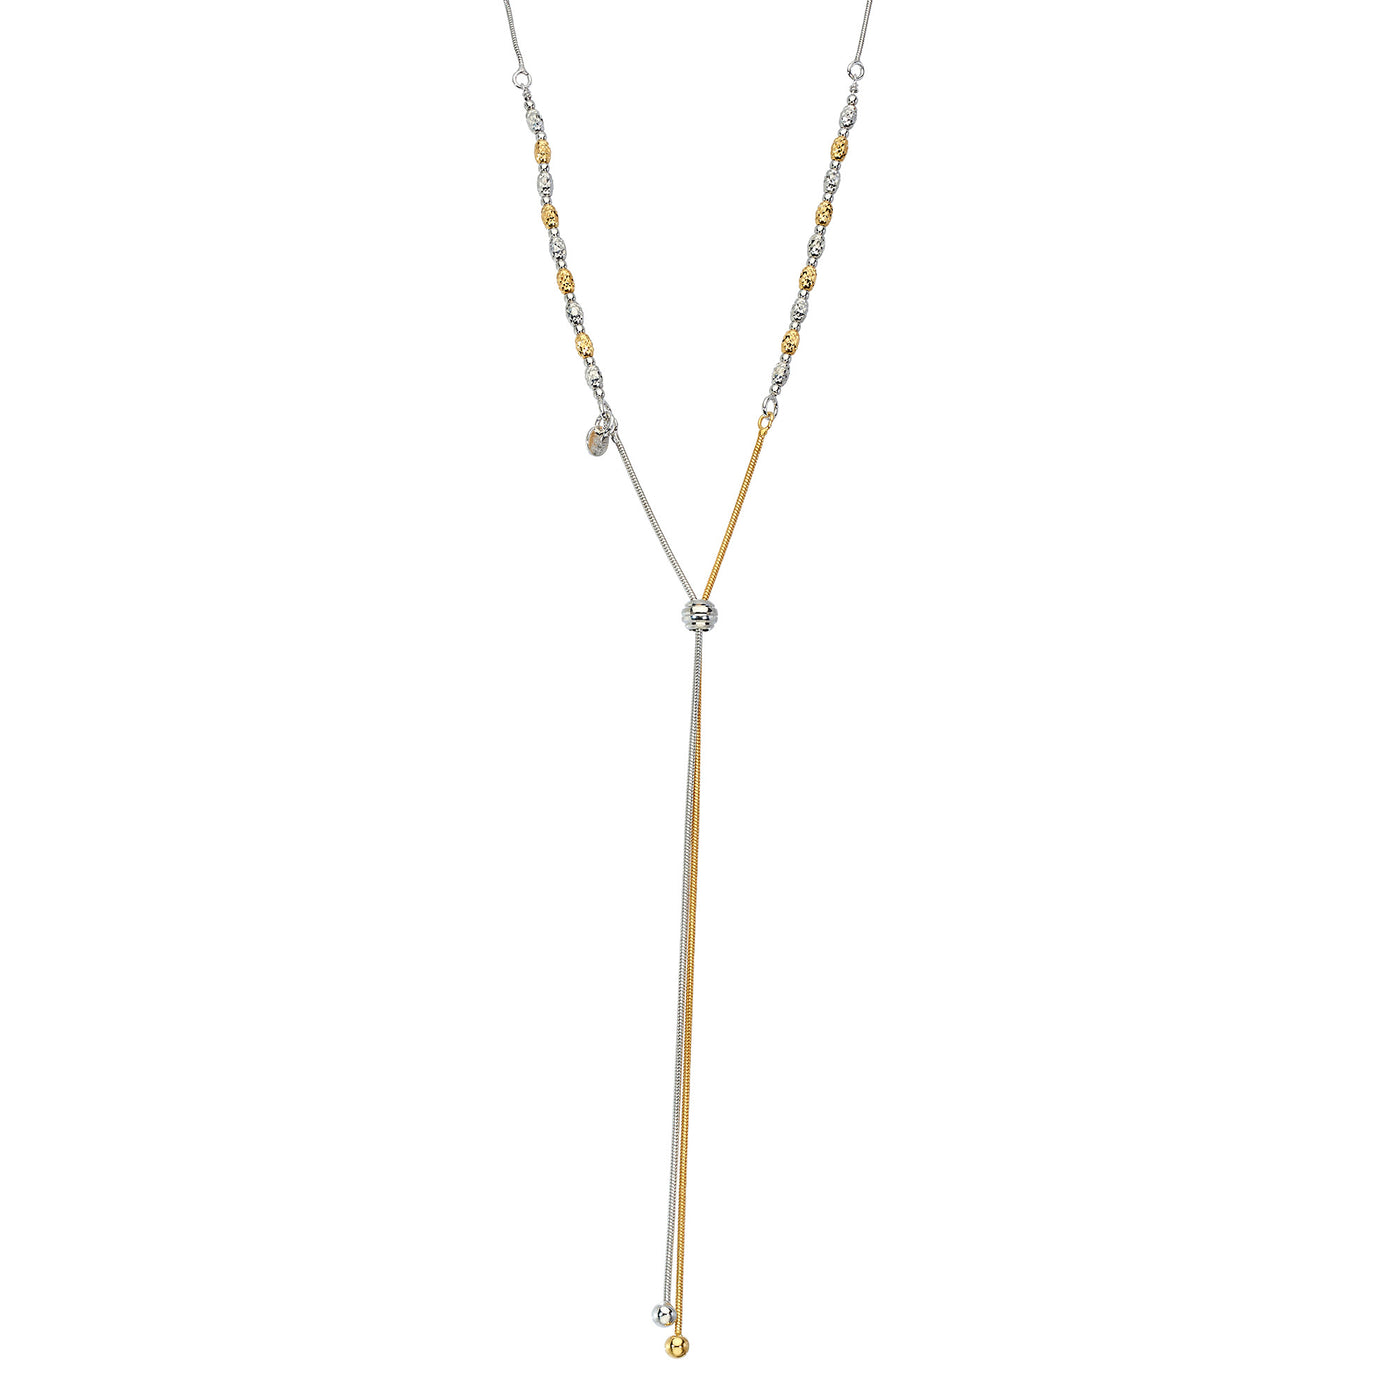 Gold And Sterling Silver Adjustable Necklace With Dc Beads And Dangle Strands